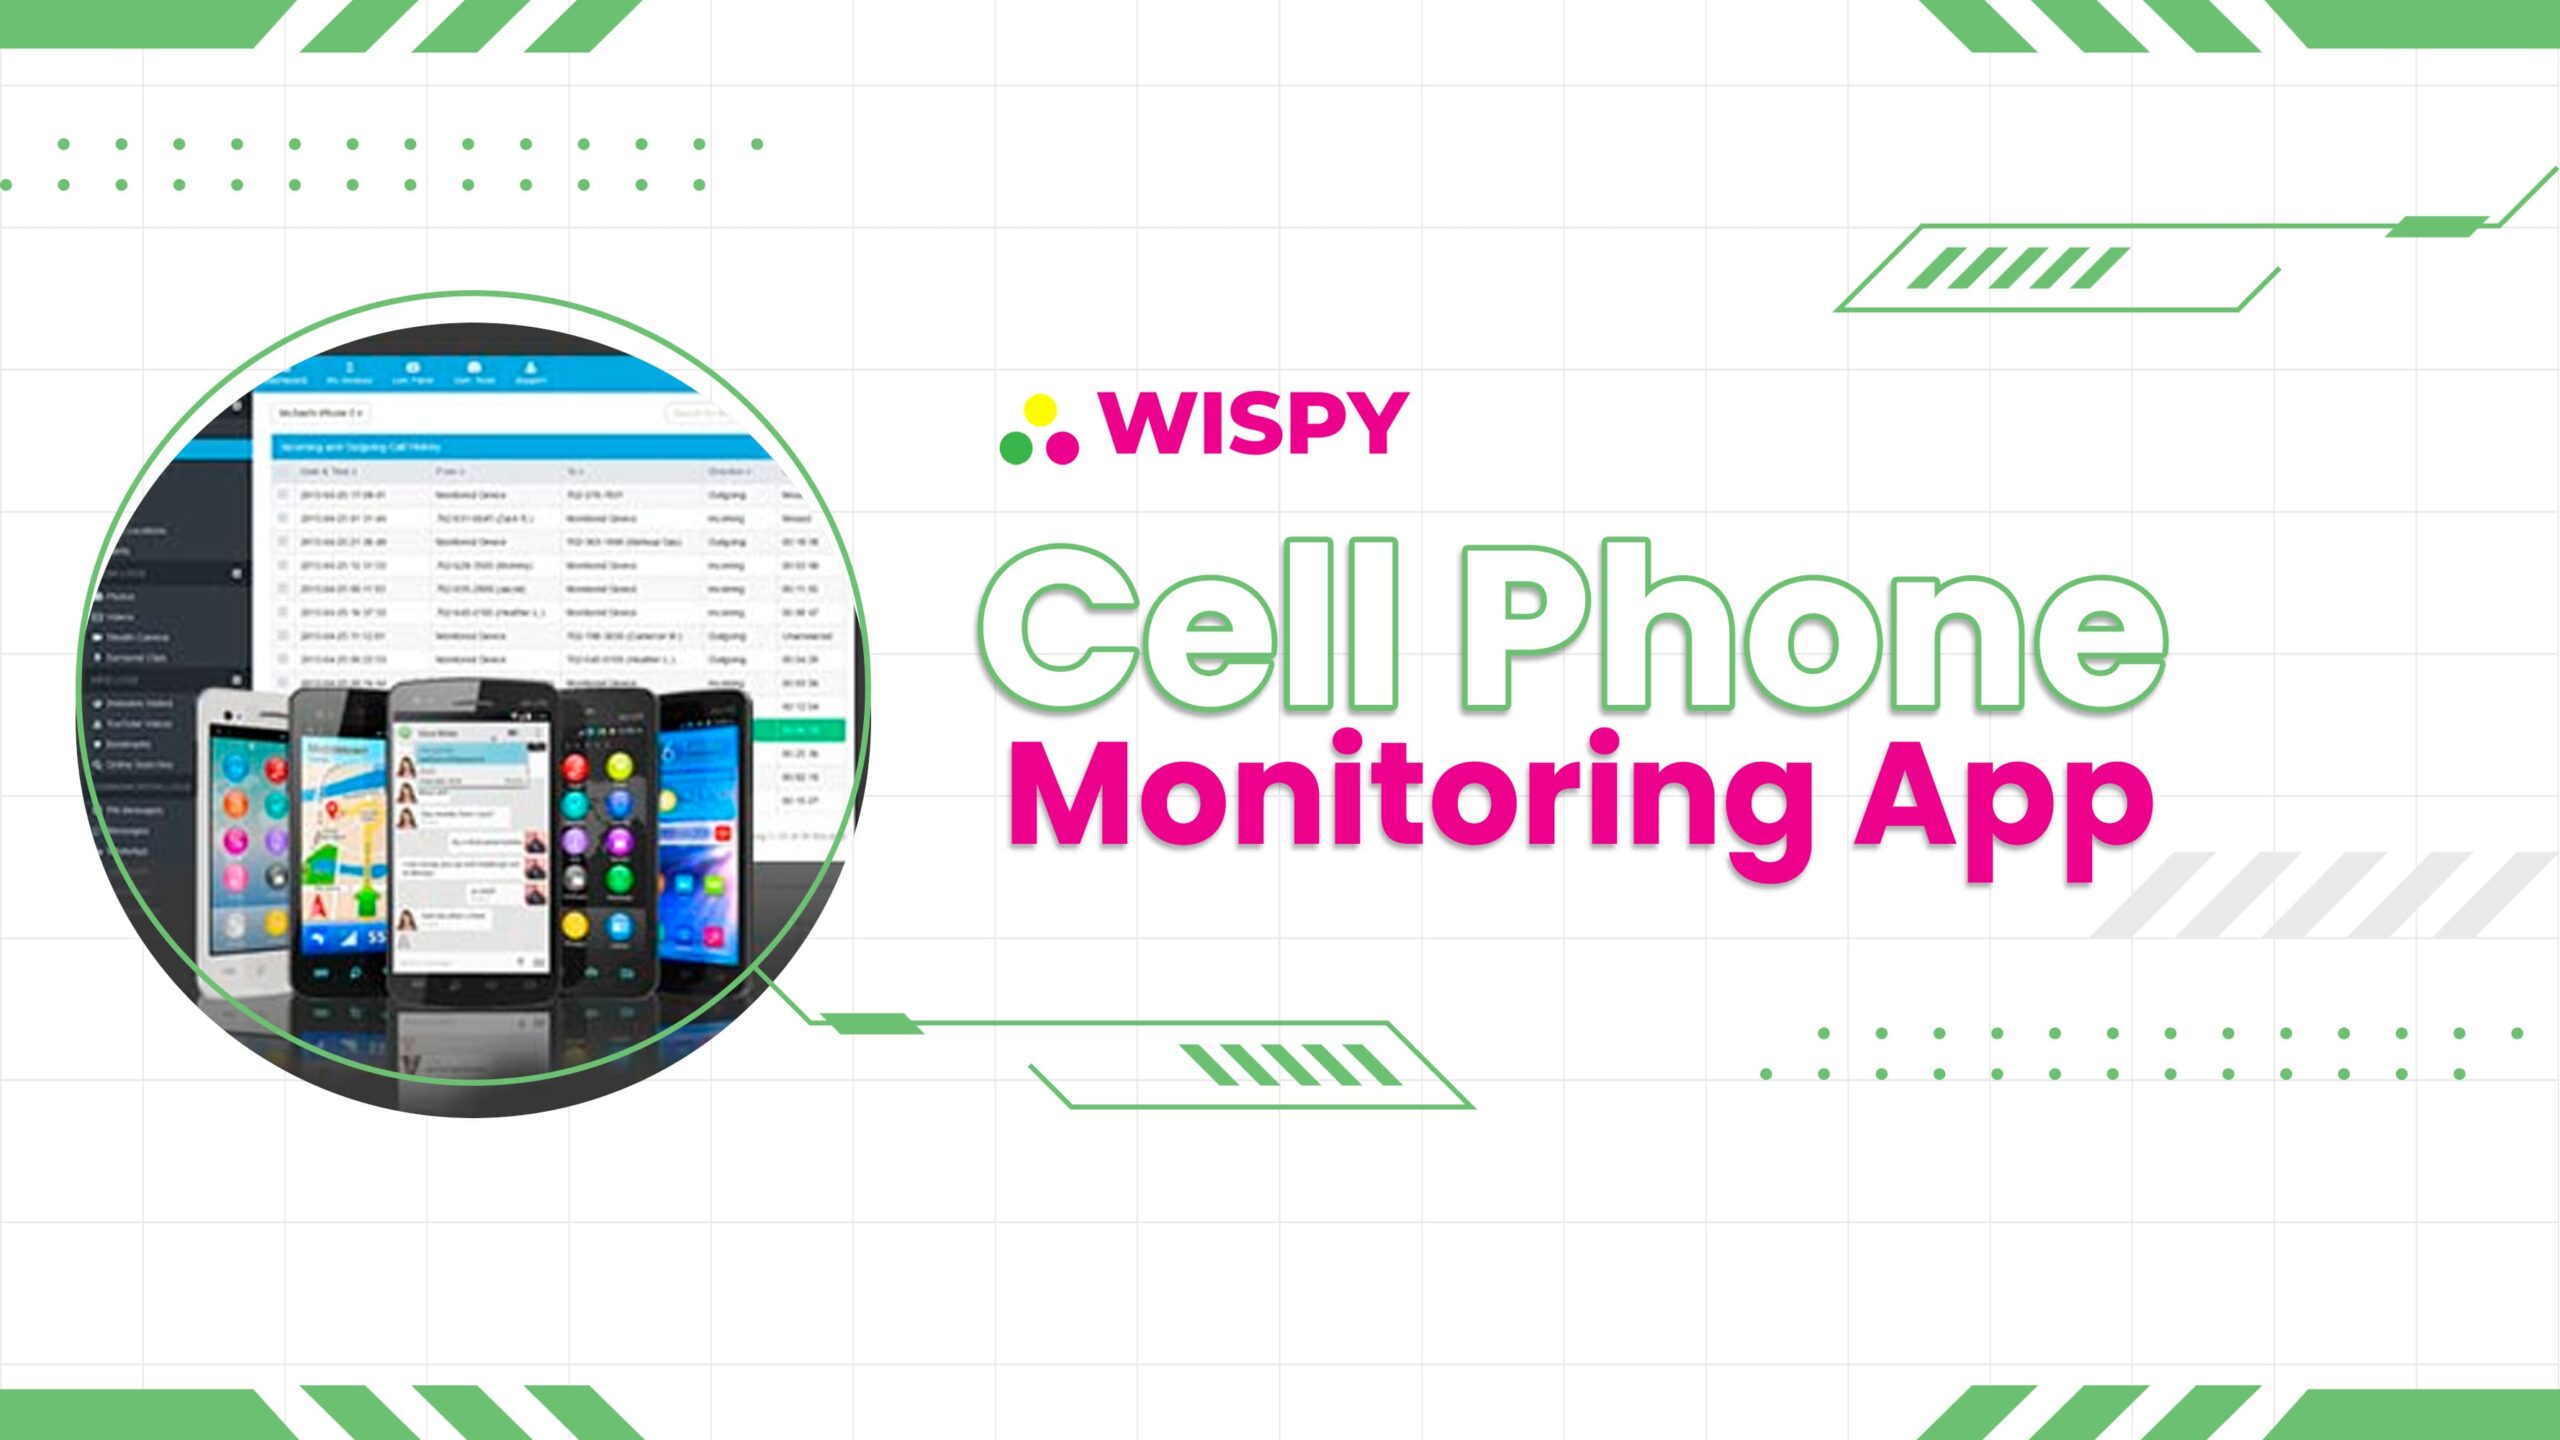 TheWiSpy Cell Phone Monitoring